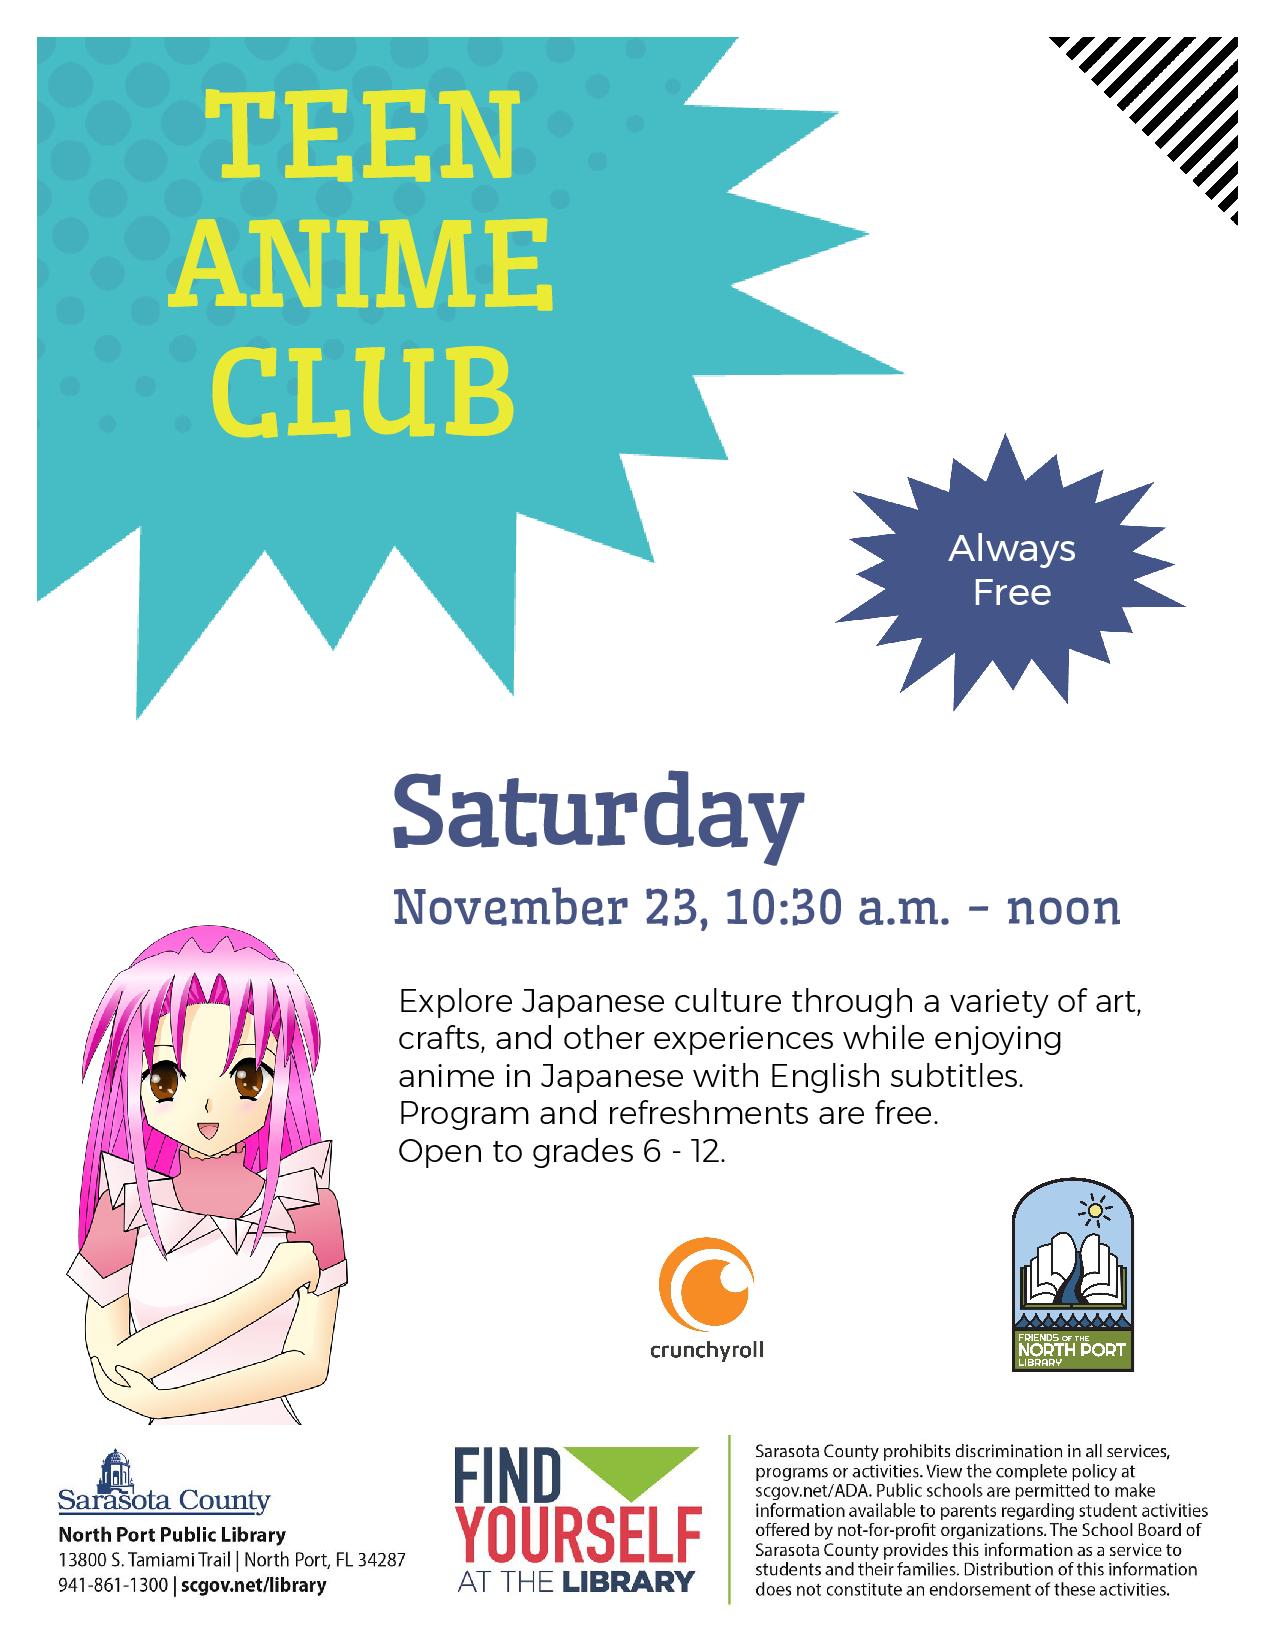 Teen anime club.  Saturday, November 23, 10:30 a.m. - noon.  Explore Japanese culture through a variety of art, crafts, and other experiences while enjoying anime in Japanese with English subtitles.  Program and refreshments are free.  Open to grades 6-12.